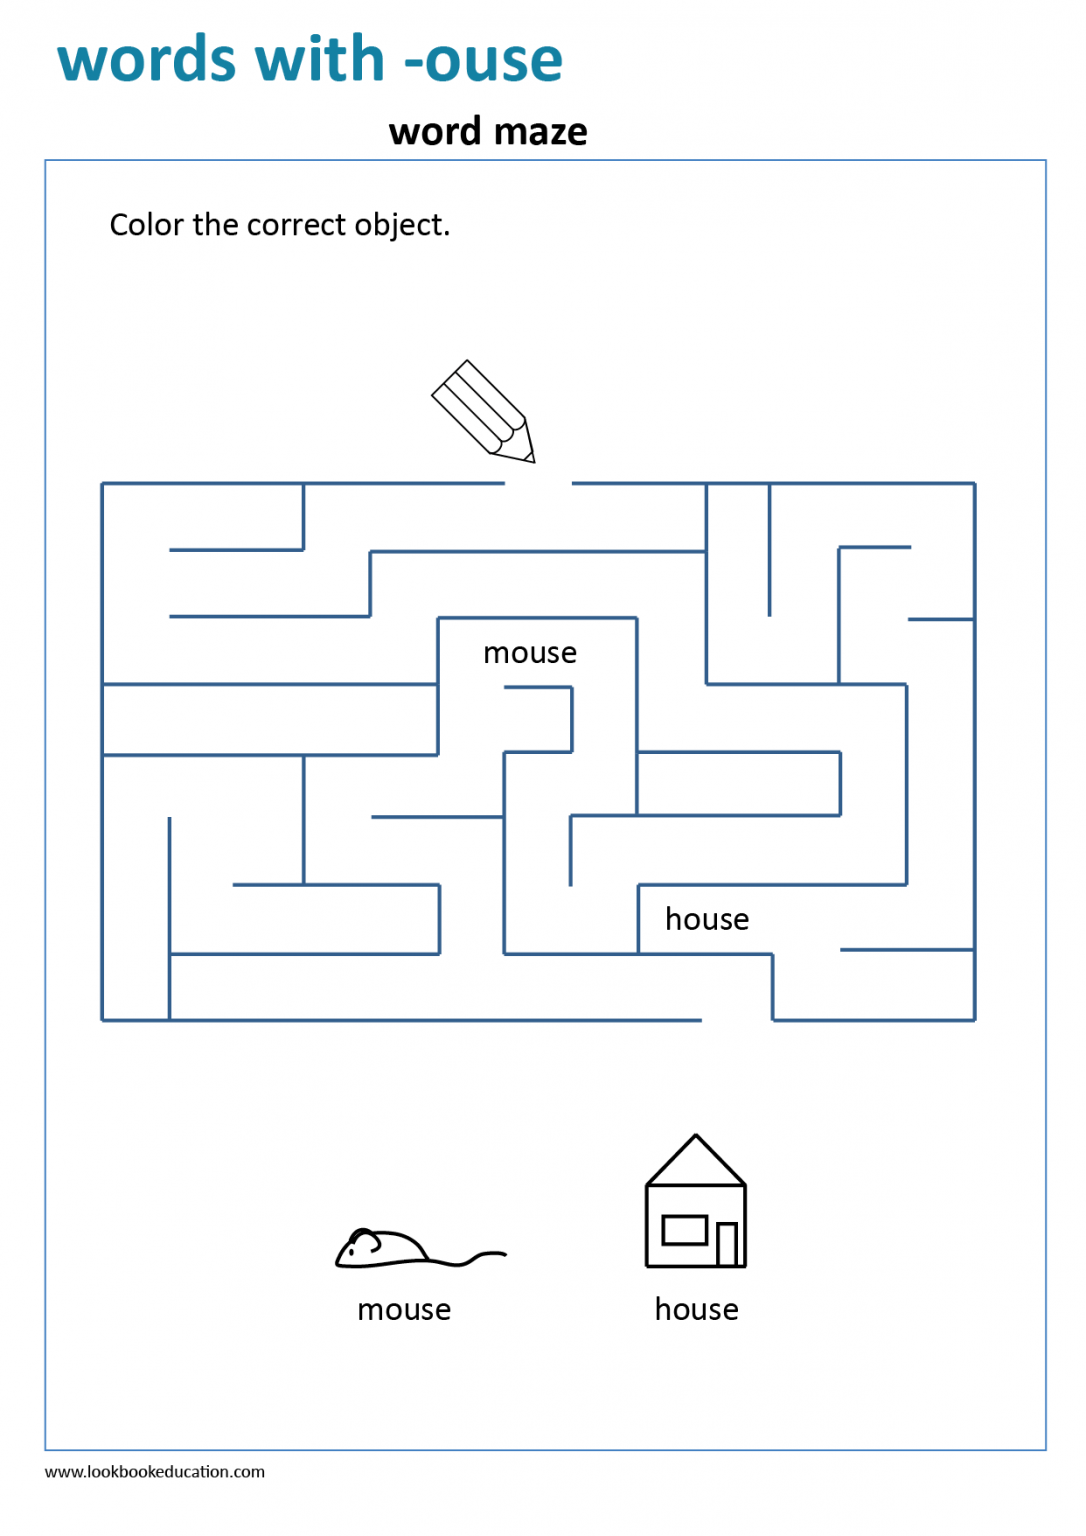 worksheet-words-with-ouse-maze-lookbookeducation